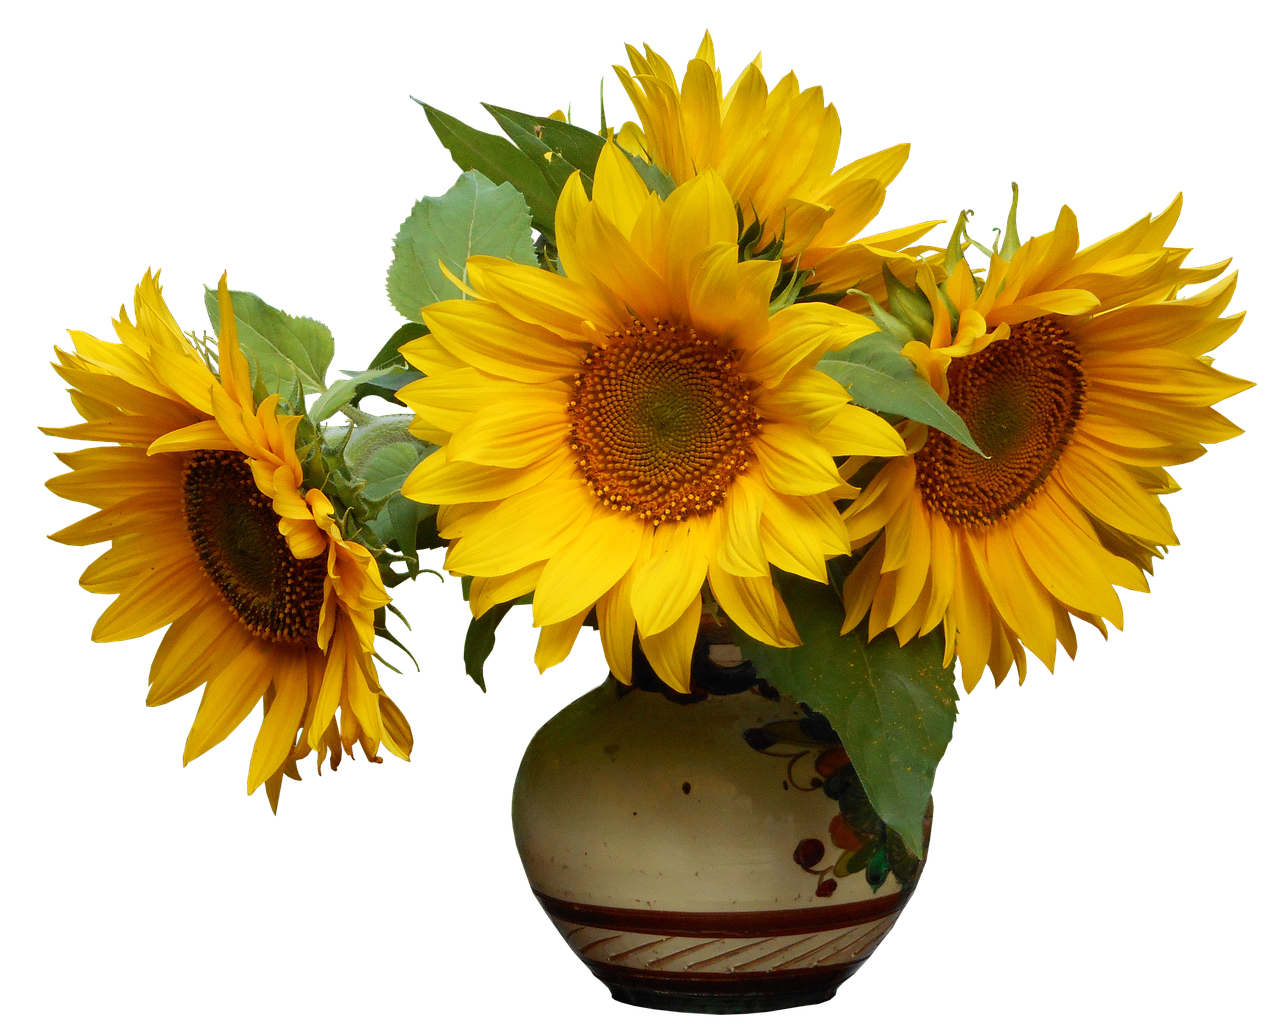 A Vase With Sunflowers In It